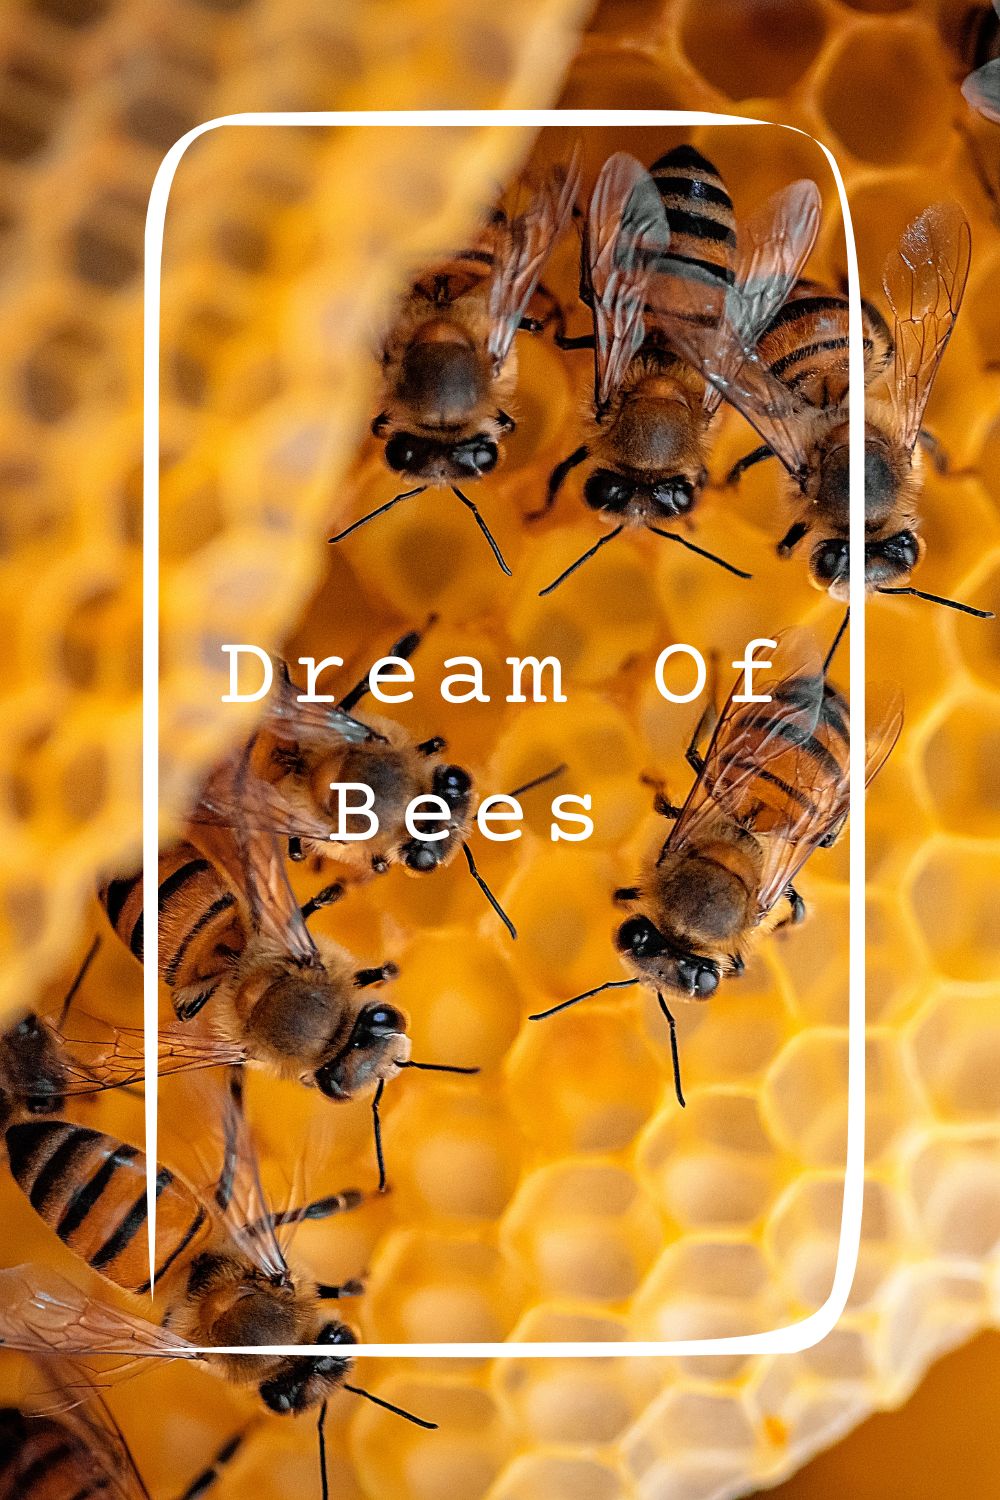 Dream Of Bees Meanings 2